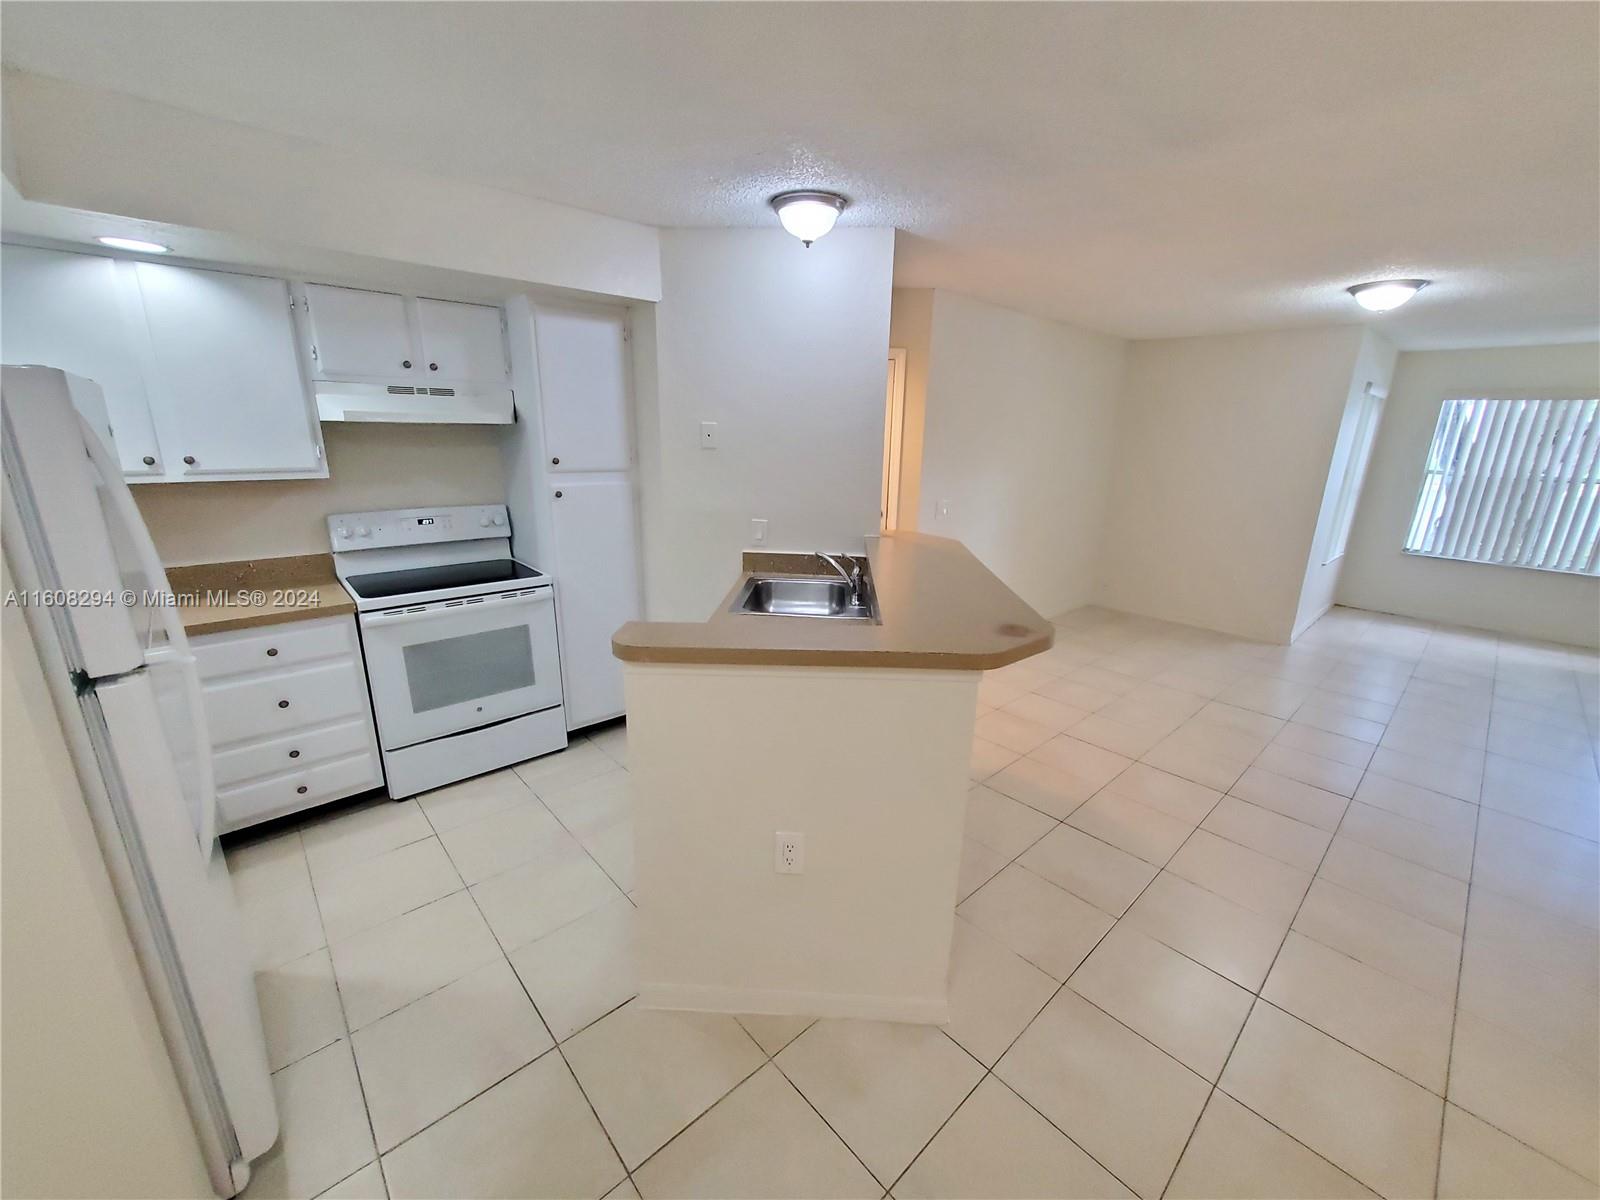 Property for Sale at 1401 Village Blvd Blvd 215, West Palm Beach, Palm Beach County, Florida - Bedrooms: 2 
Bathrooms: 1  - $184,000